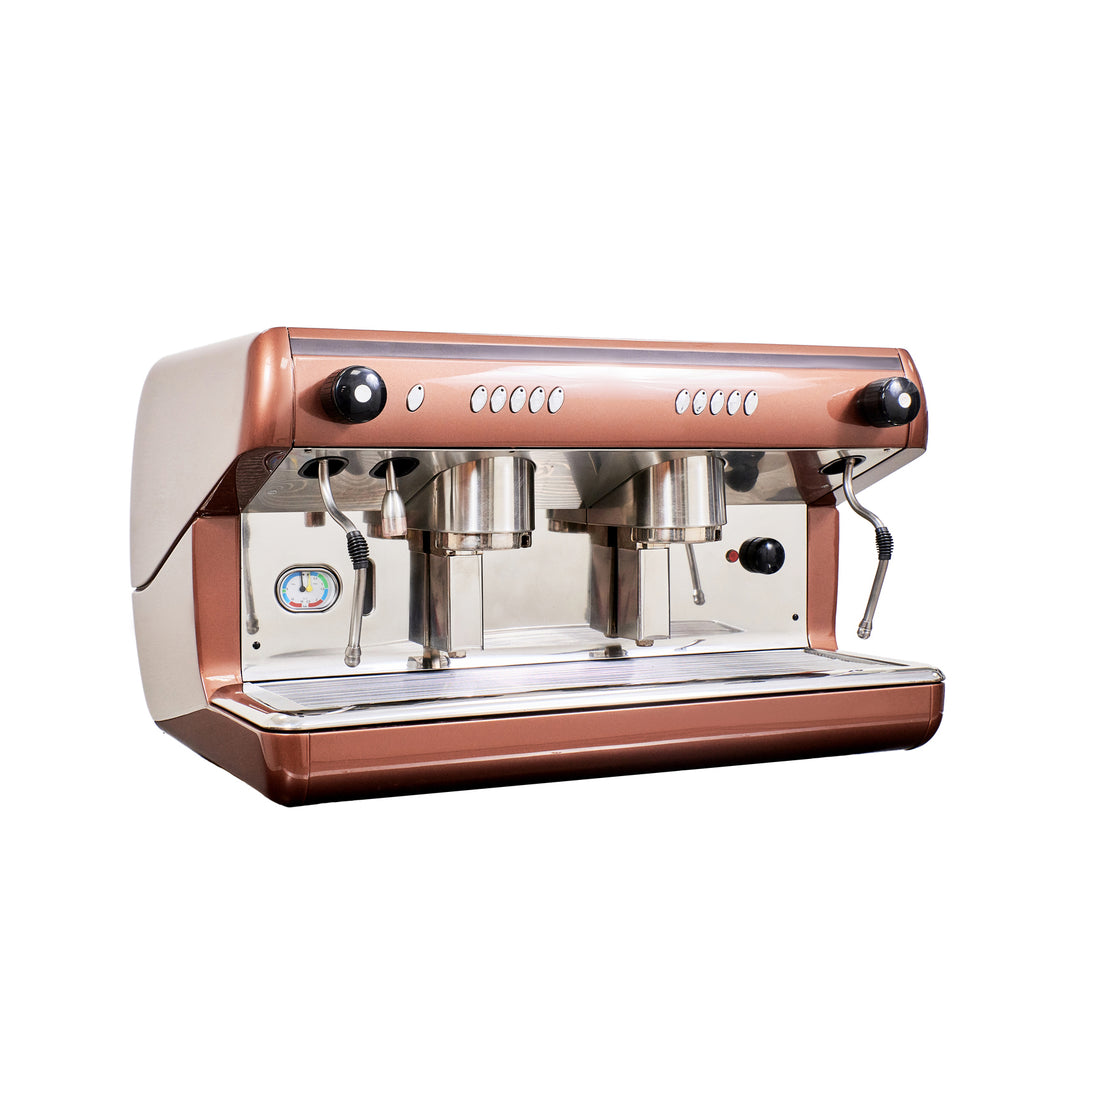 Professional 2-group coffee machine in a retro brown color